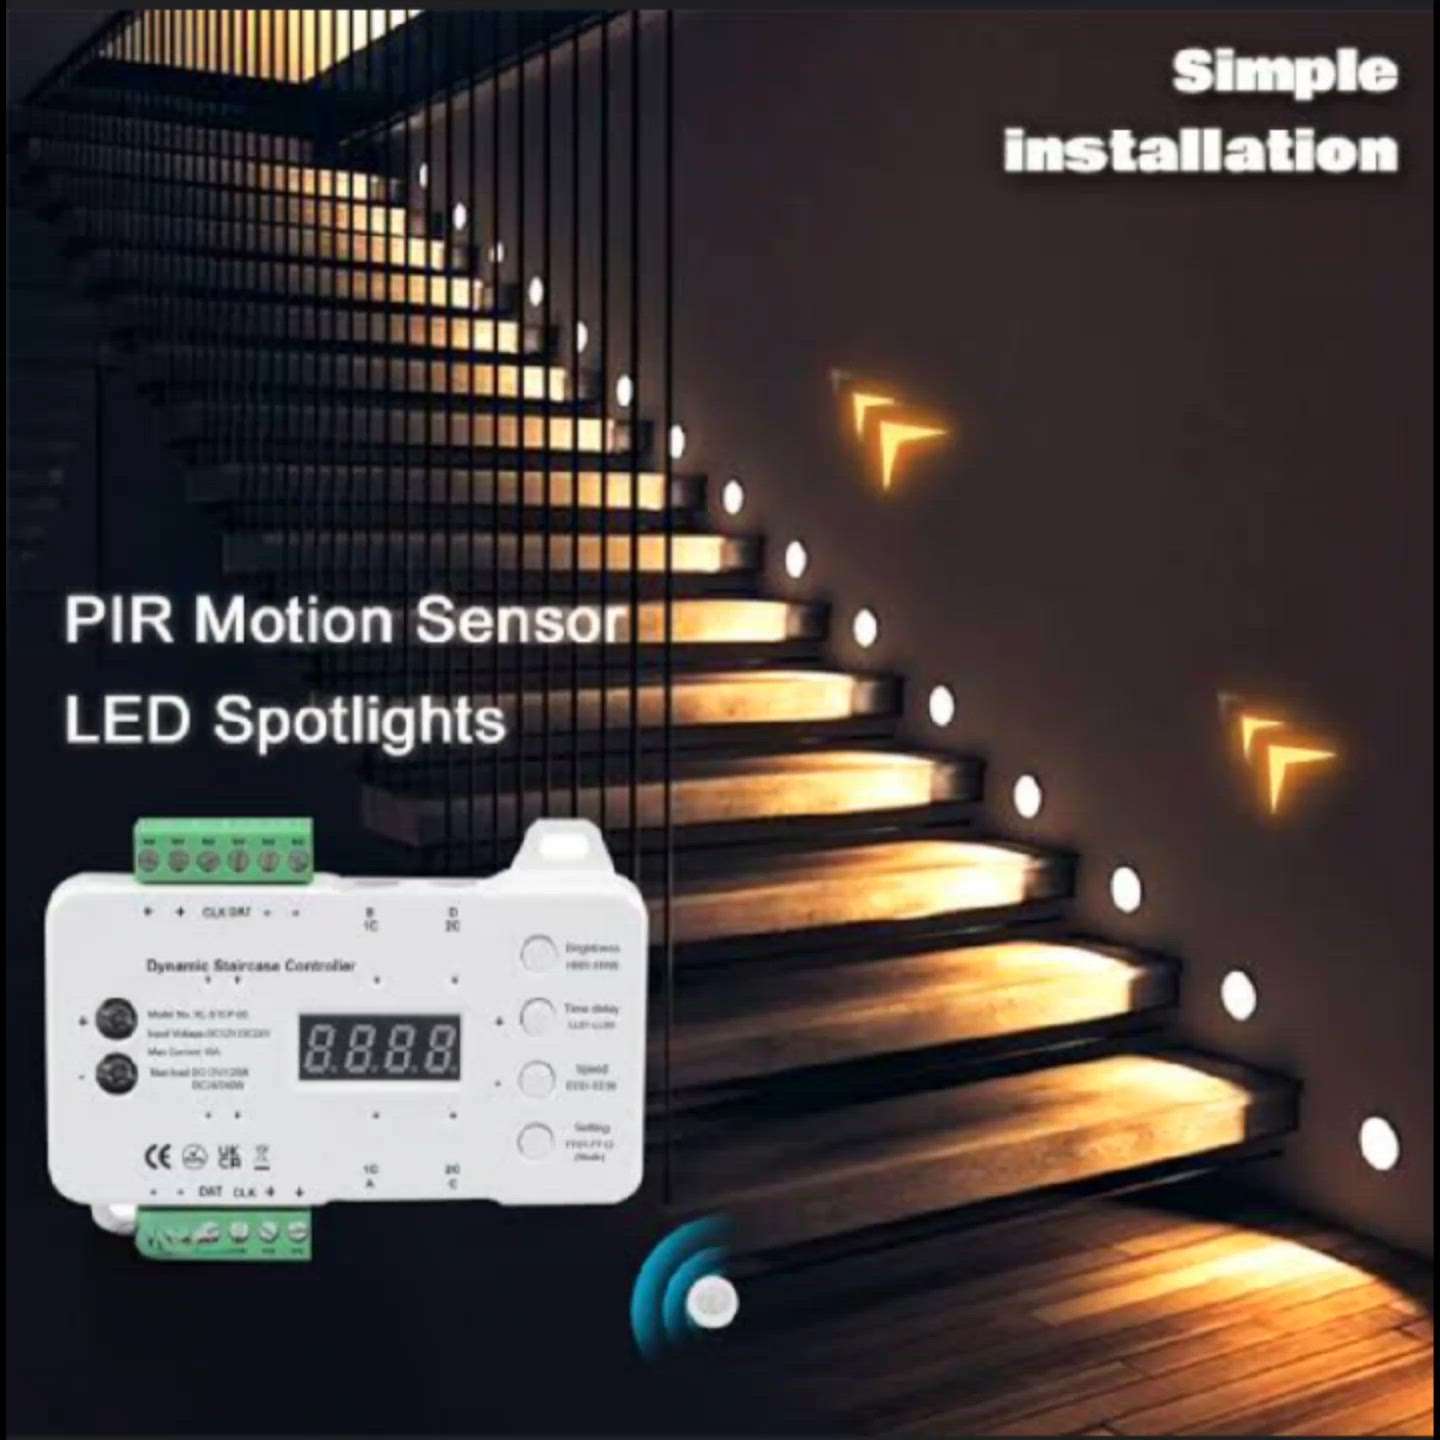 smart staircase lights 
when step into stair lights on one by one automatically